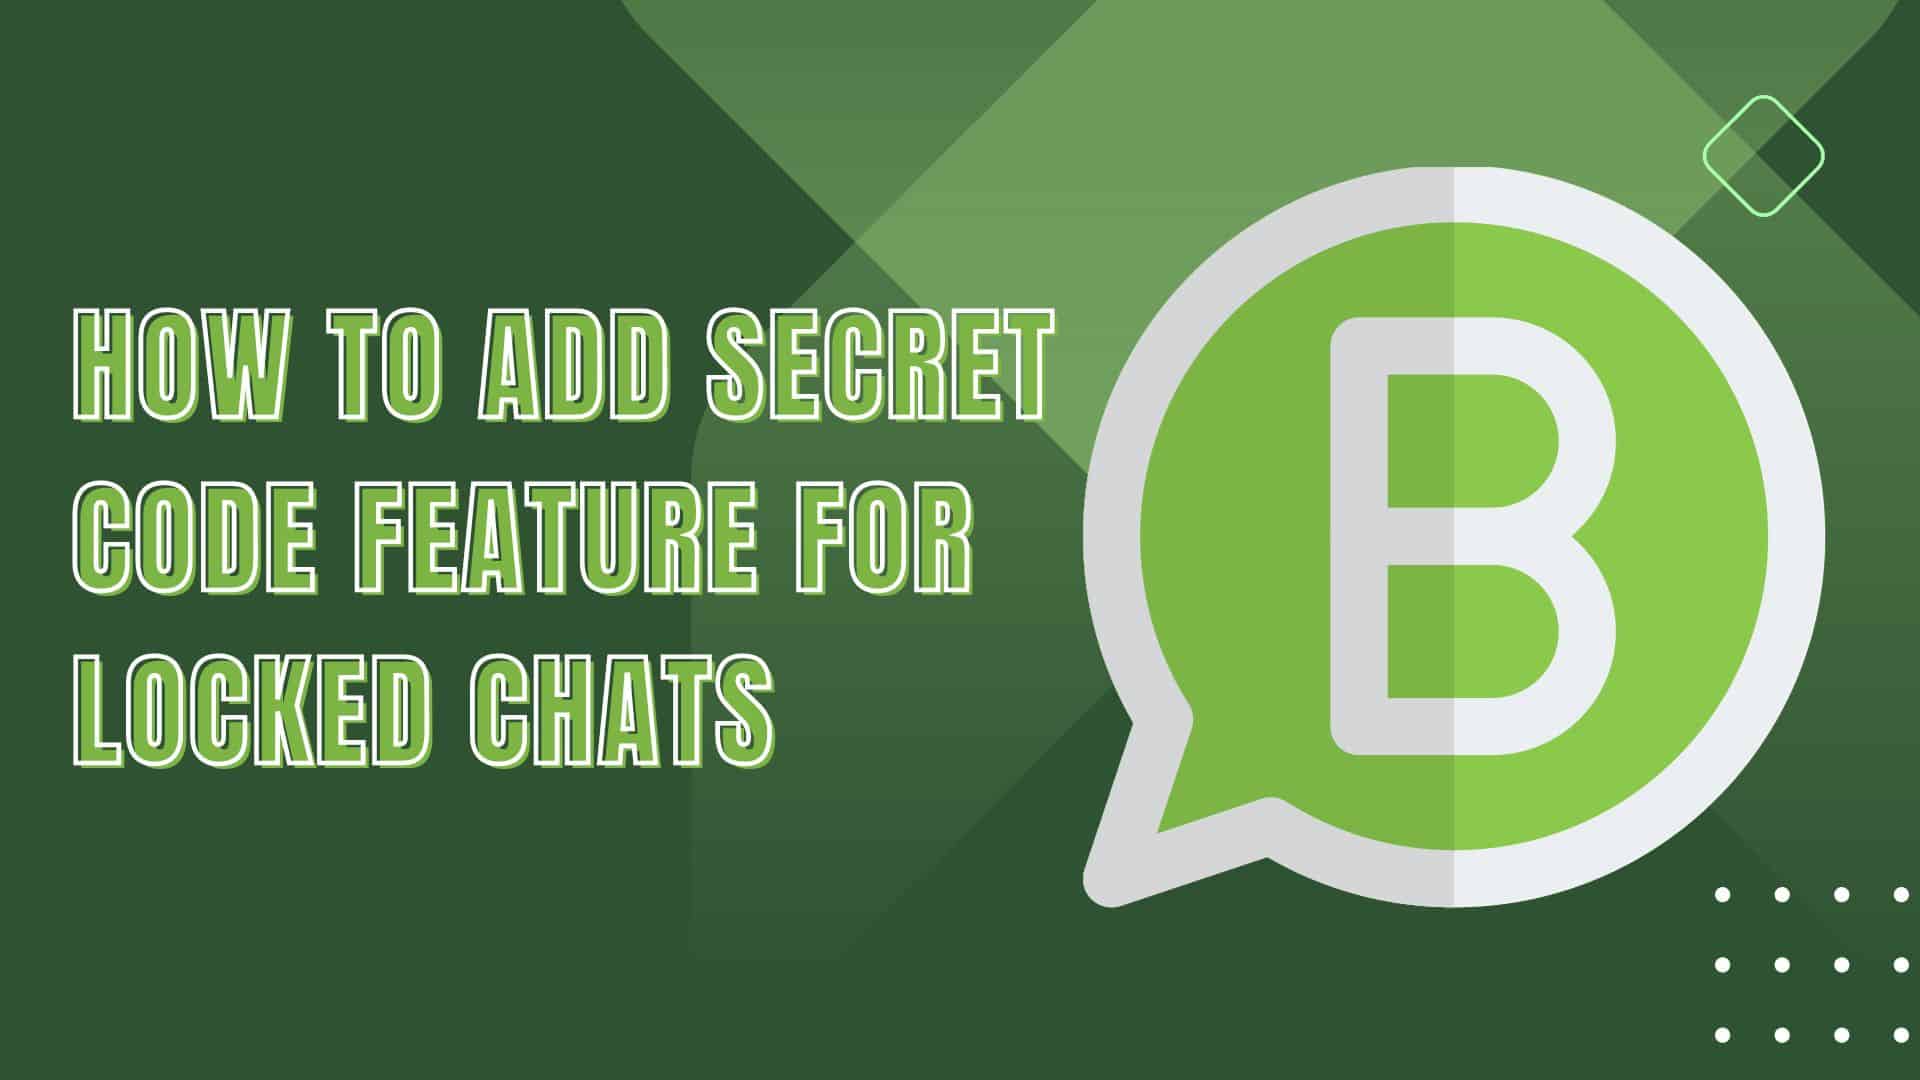 How to add secret code feature for locked chats on whatsapp